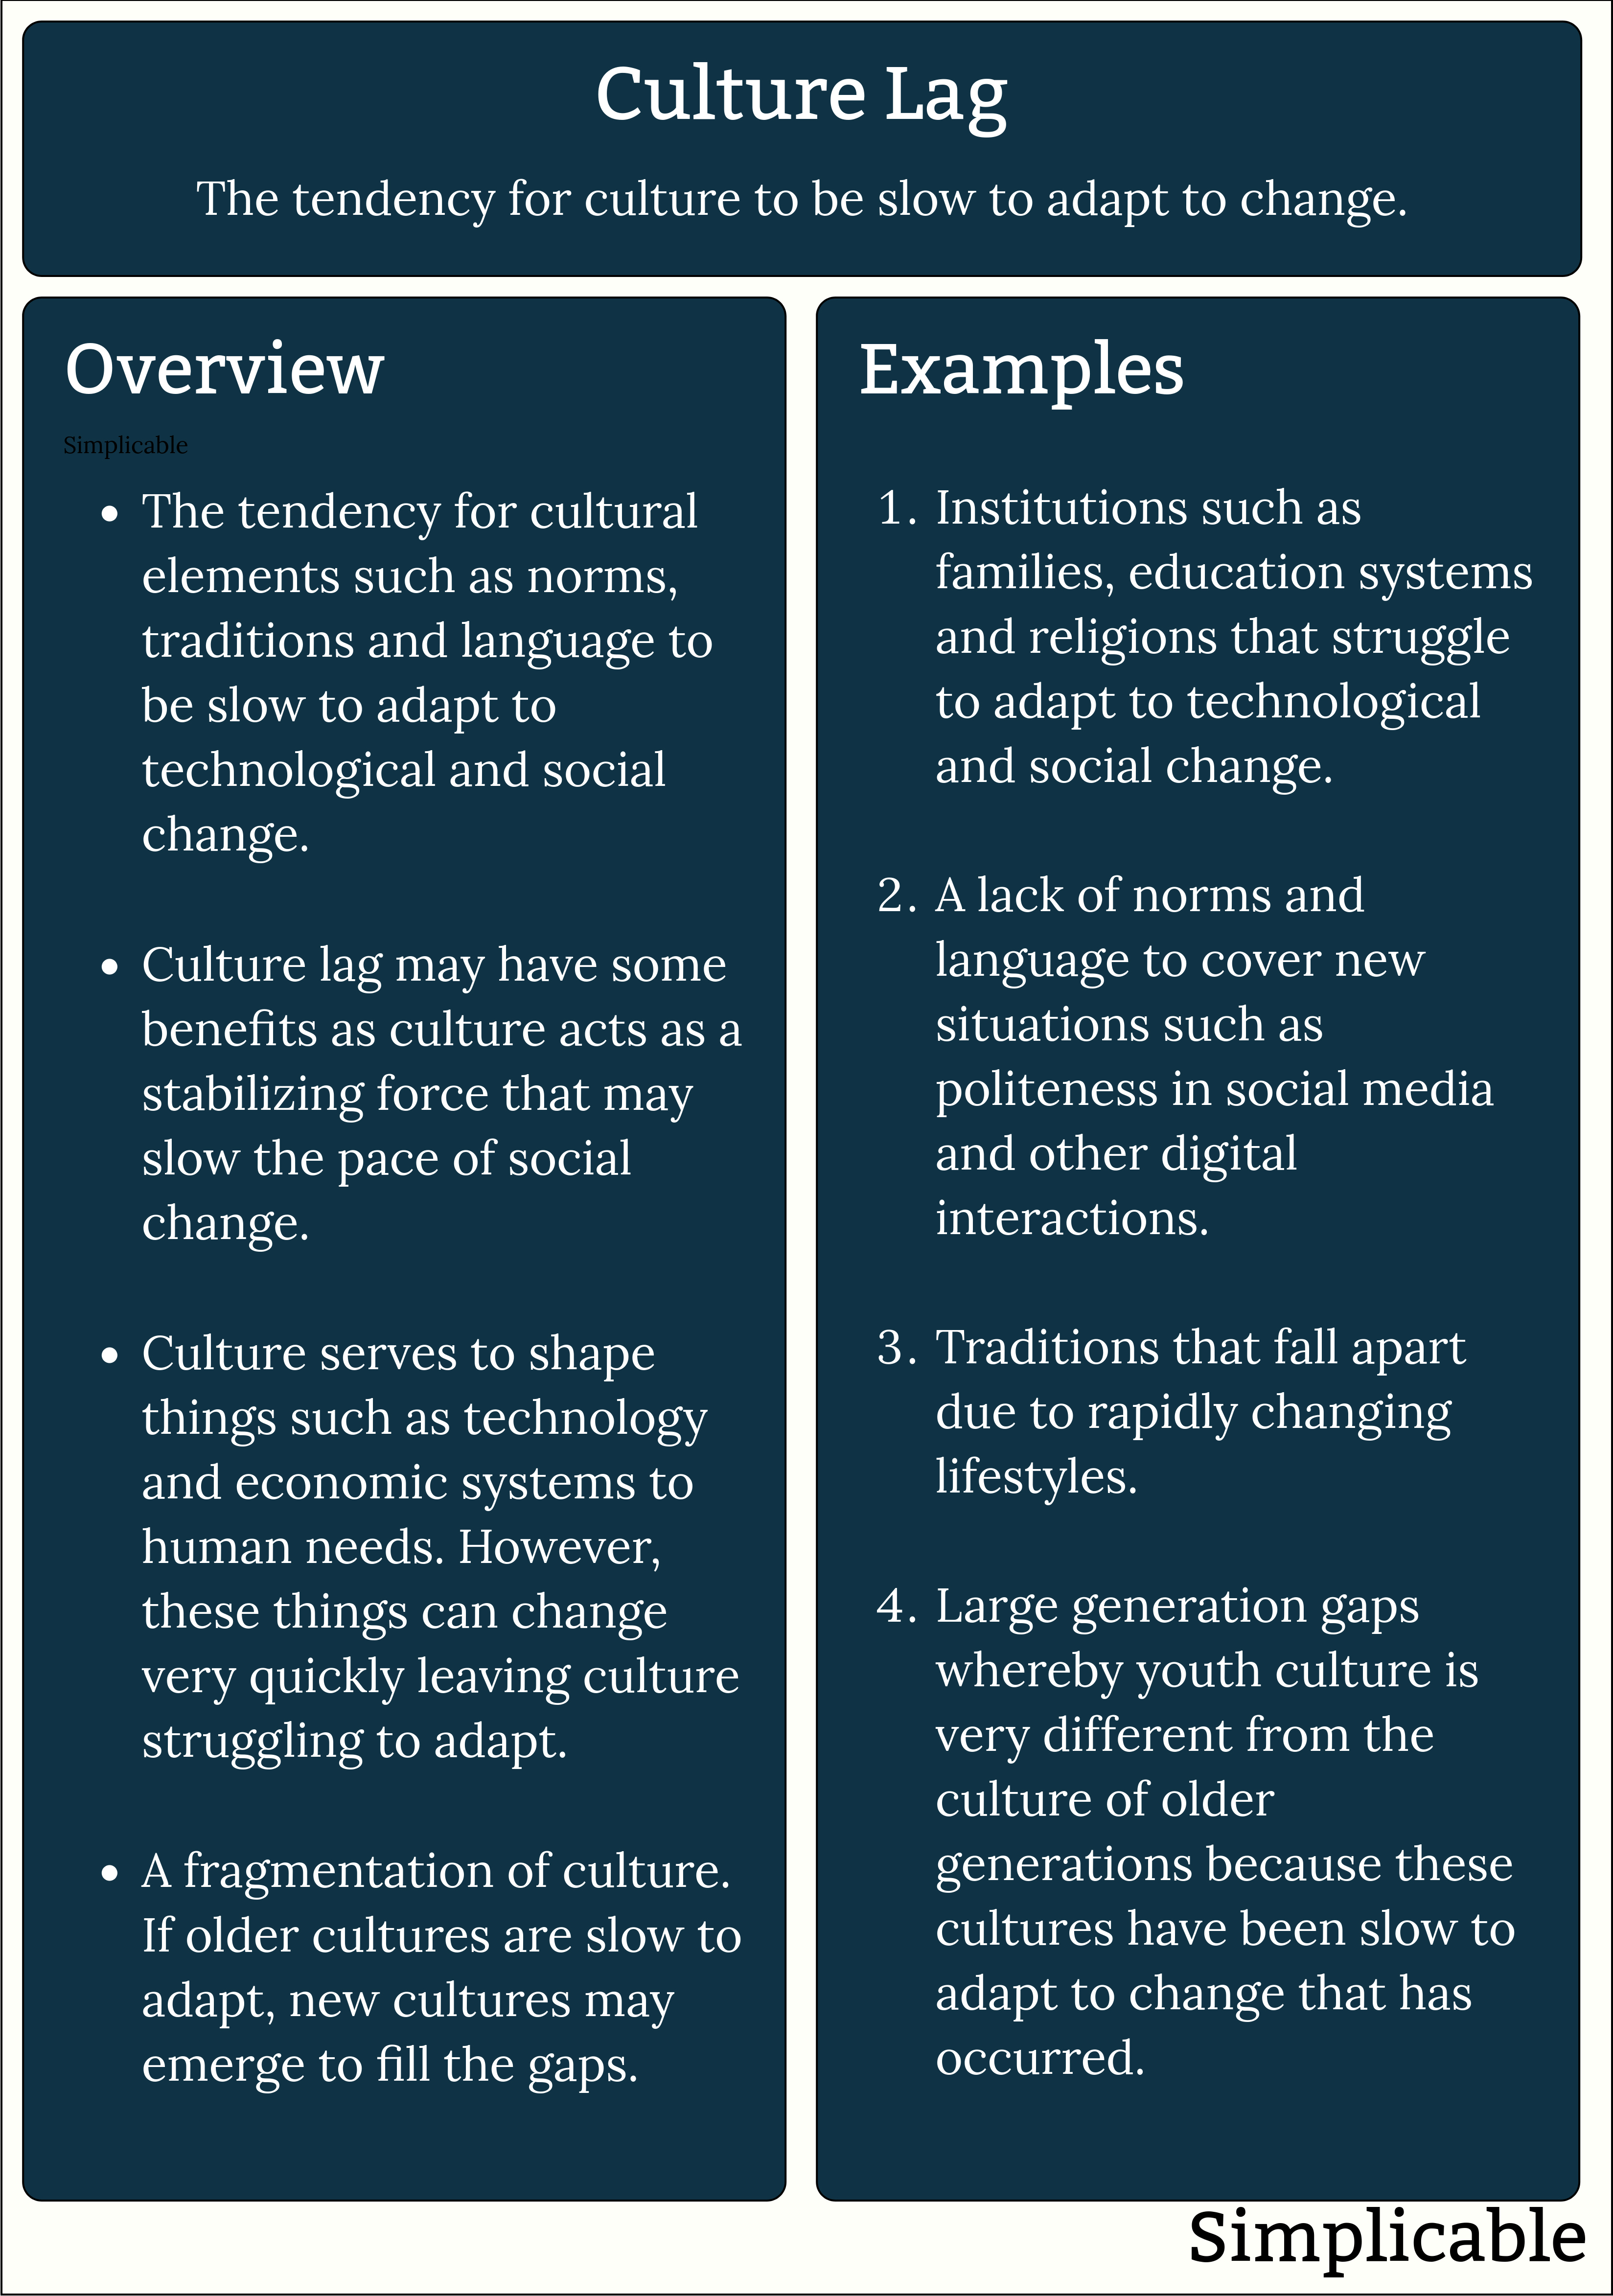 culture lag overview and examples